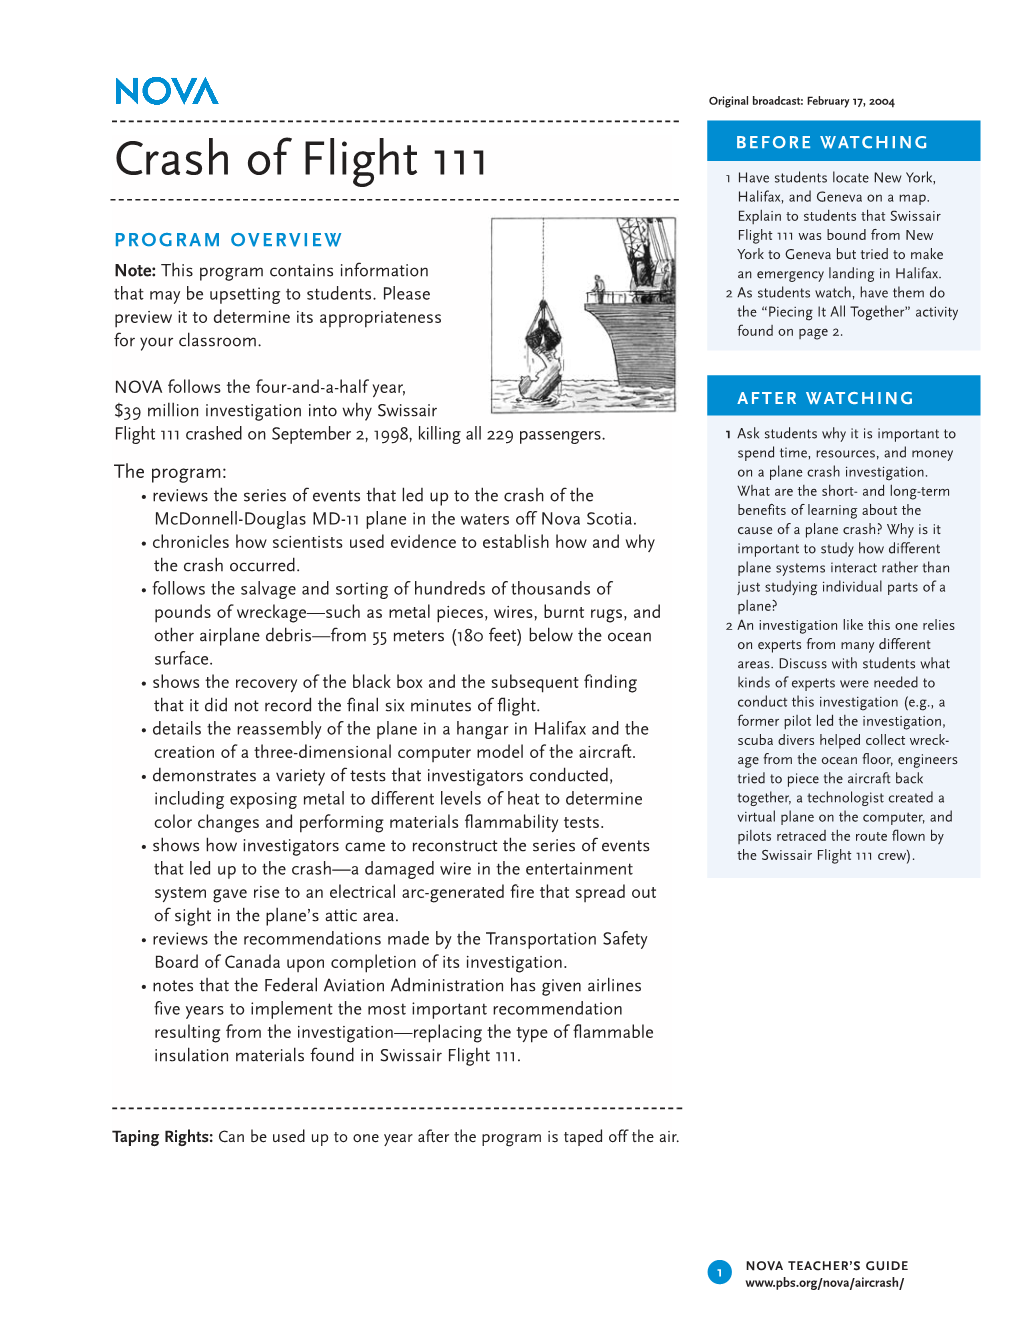 Crash of Flight 111 1 Have Students Locate New York, Halifax, and Geneva on a Map